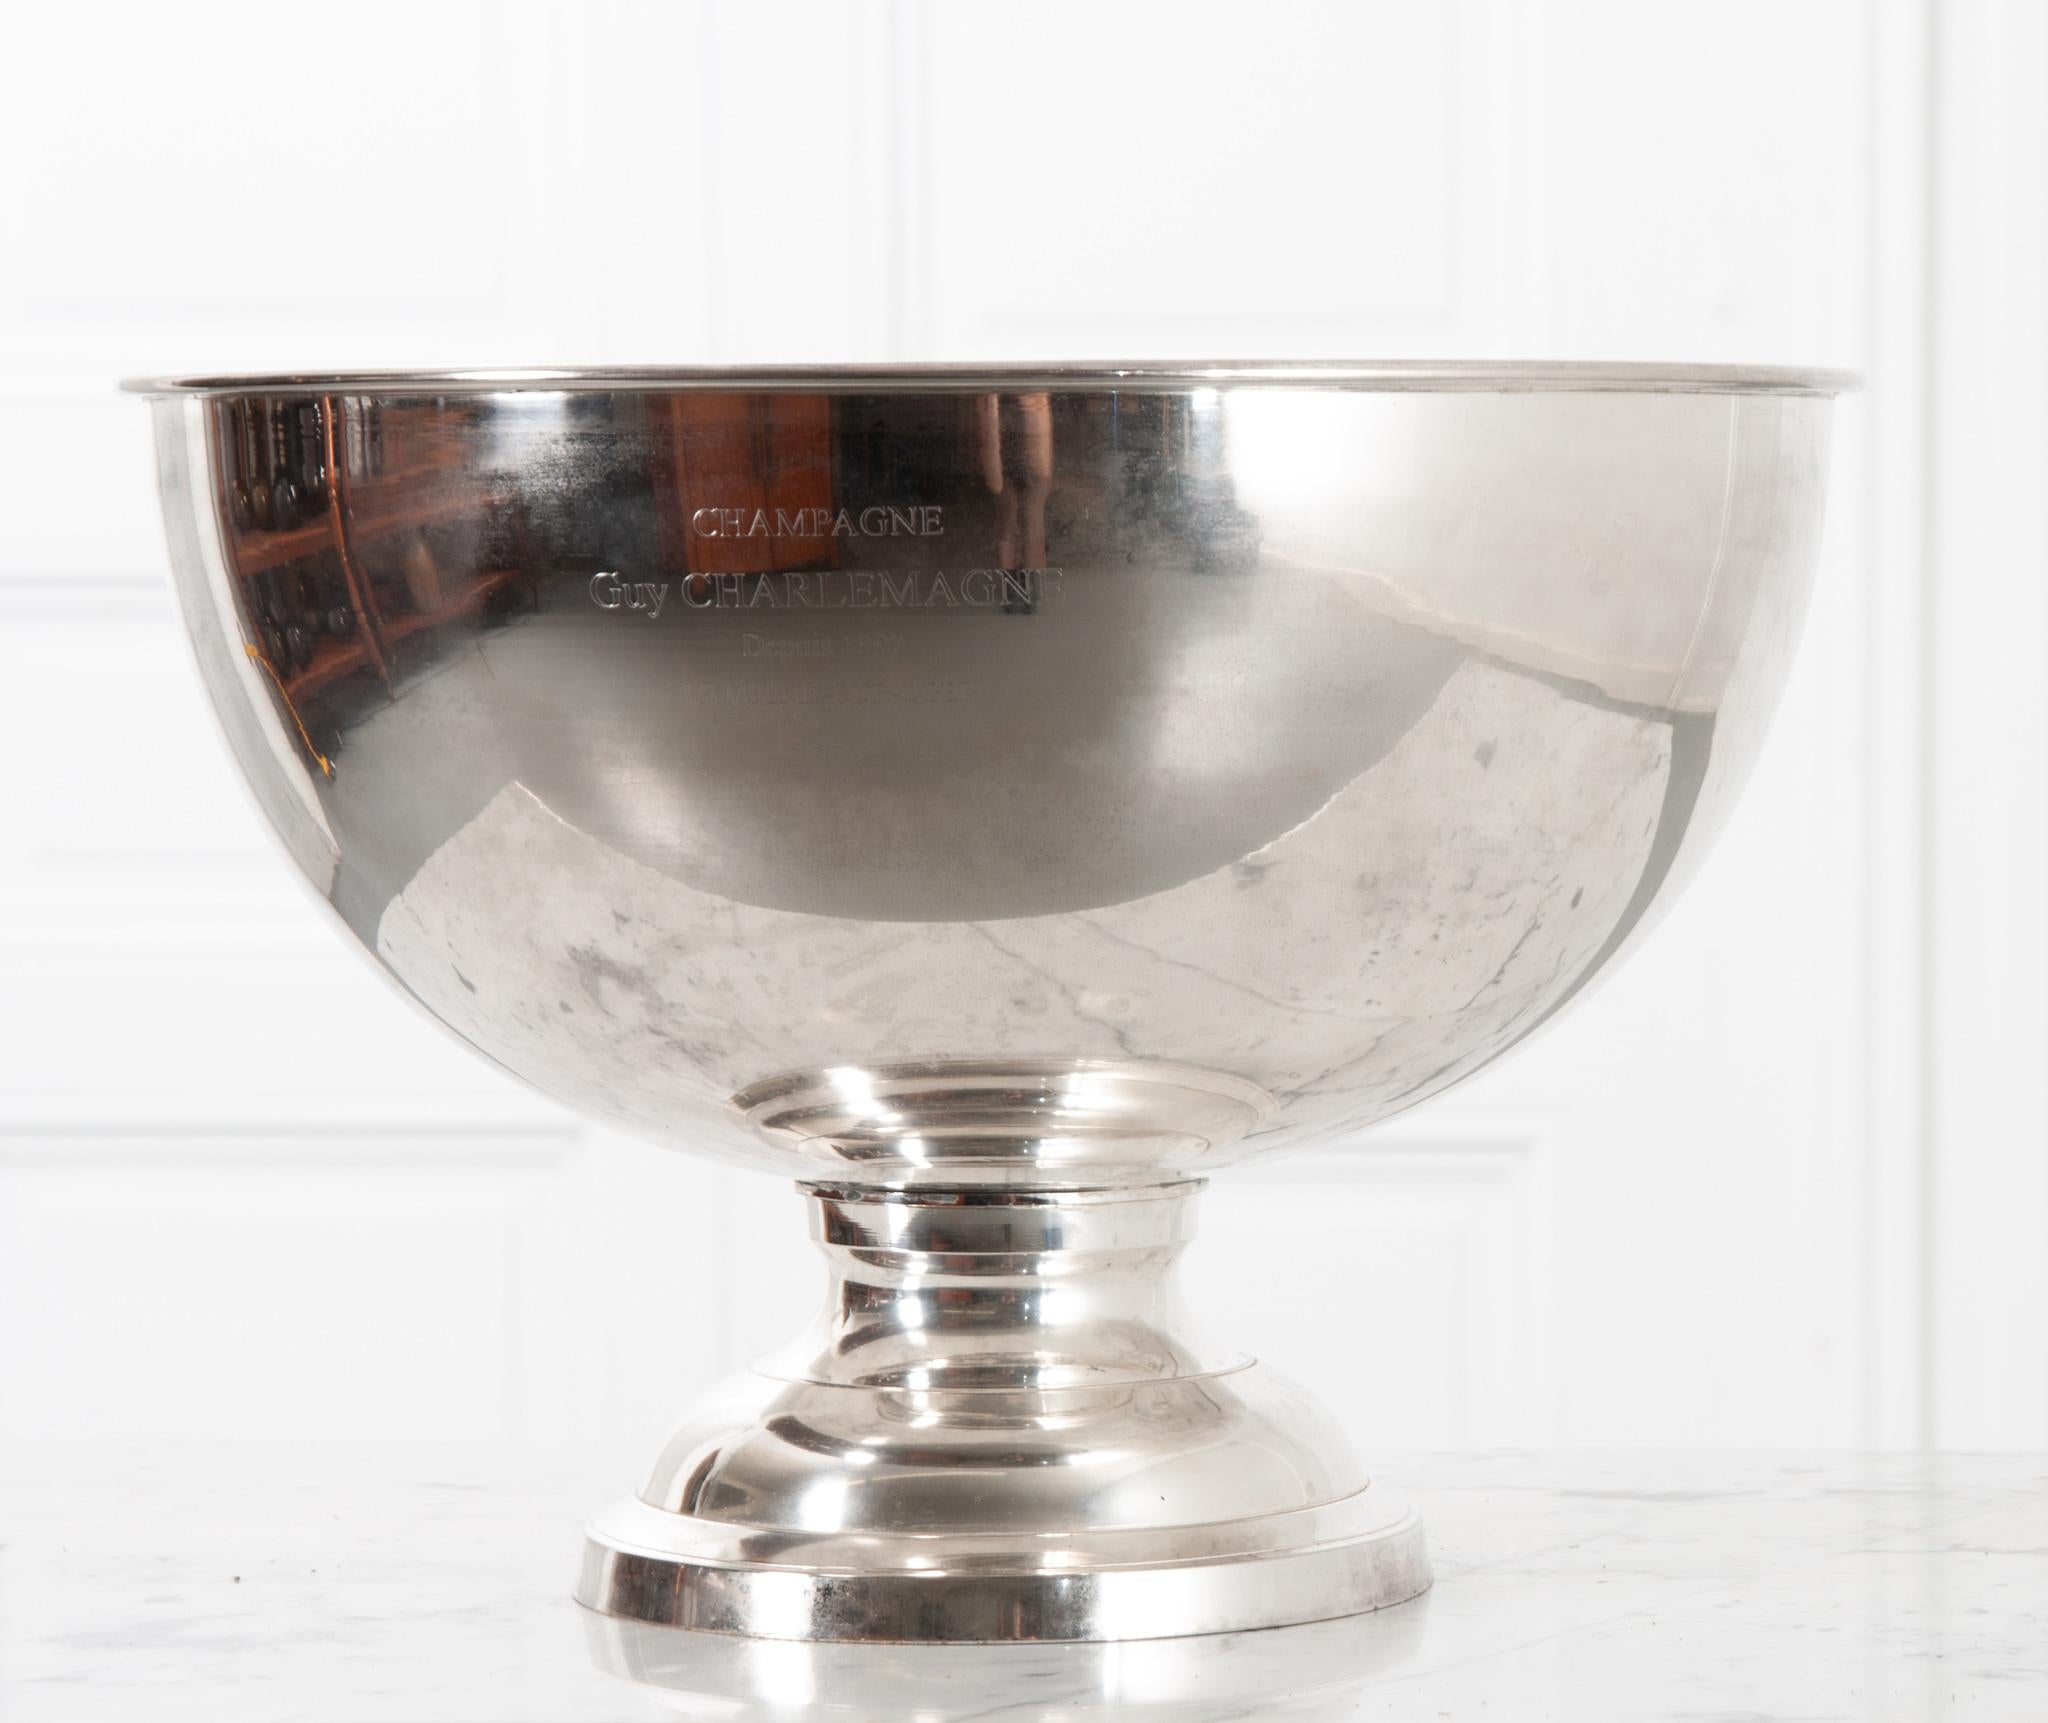 Originally made and distributed by Guy Charlemagne Champagne in the Le Mesnil- Sur- Oger region of north-eastern France, this champagne bucket is silver plated and polished to shine like new. Engraved with “Guy Charlemagne Depuis 1892 Le Mesnil-